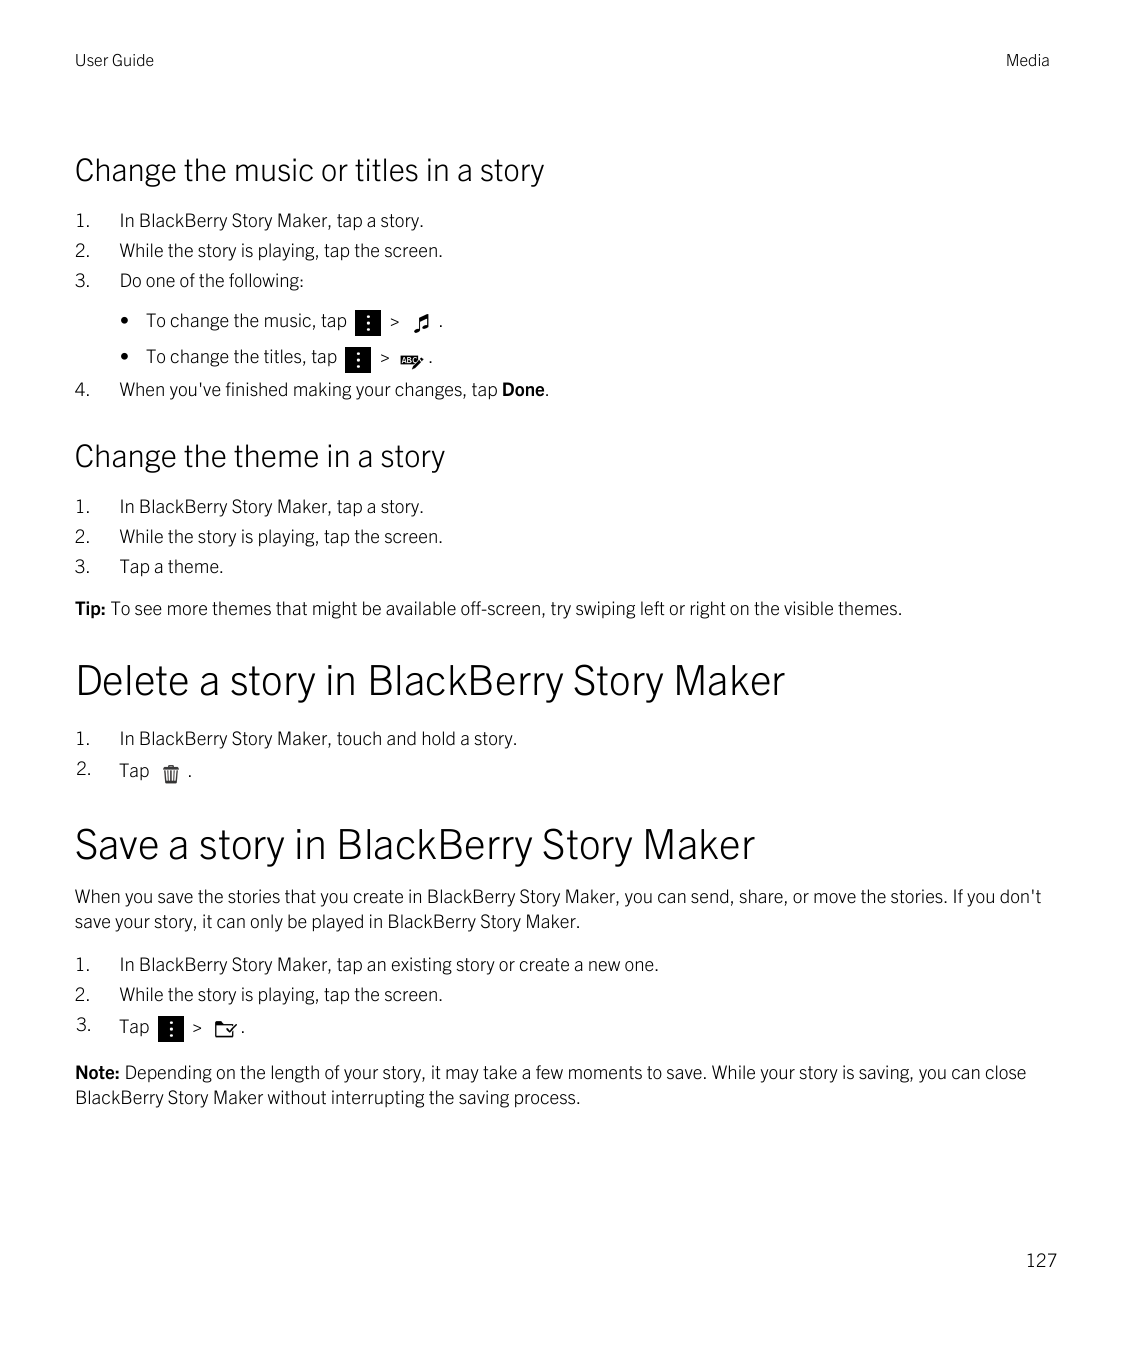 User GuideMediaChange the music or titles in a story1.In BlackBerry Story Maker, tap a story.2.While the story is playing, tap t